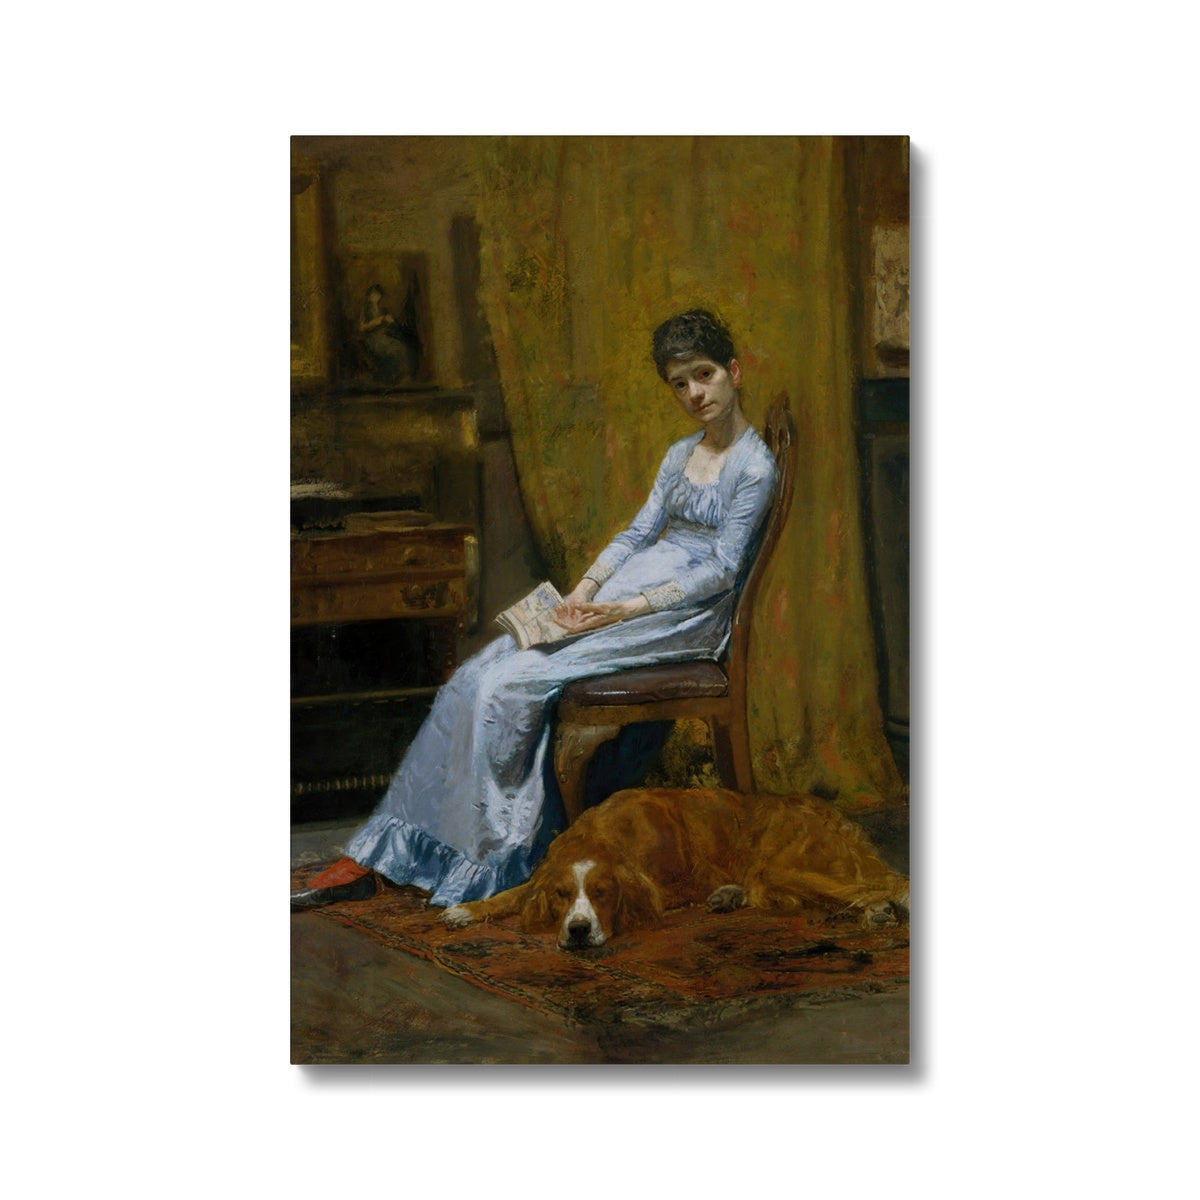 The Artist's Wife and His Setter Dog, Thomas Eakins, 1849, Canvas Ramble & Roam